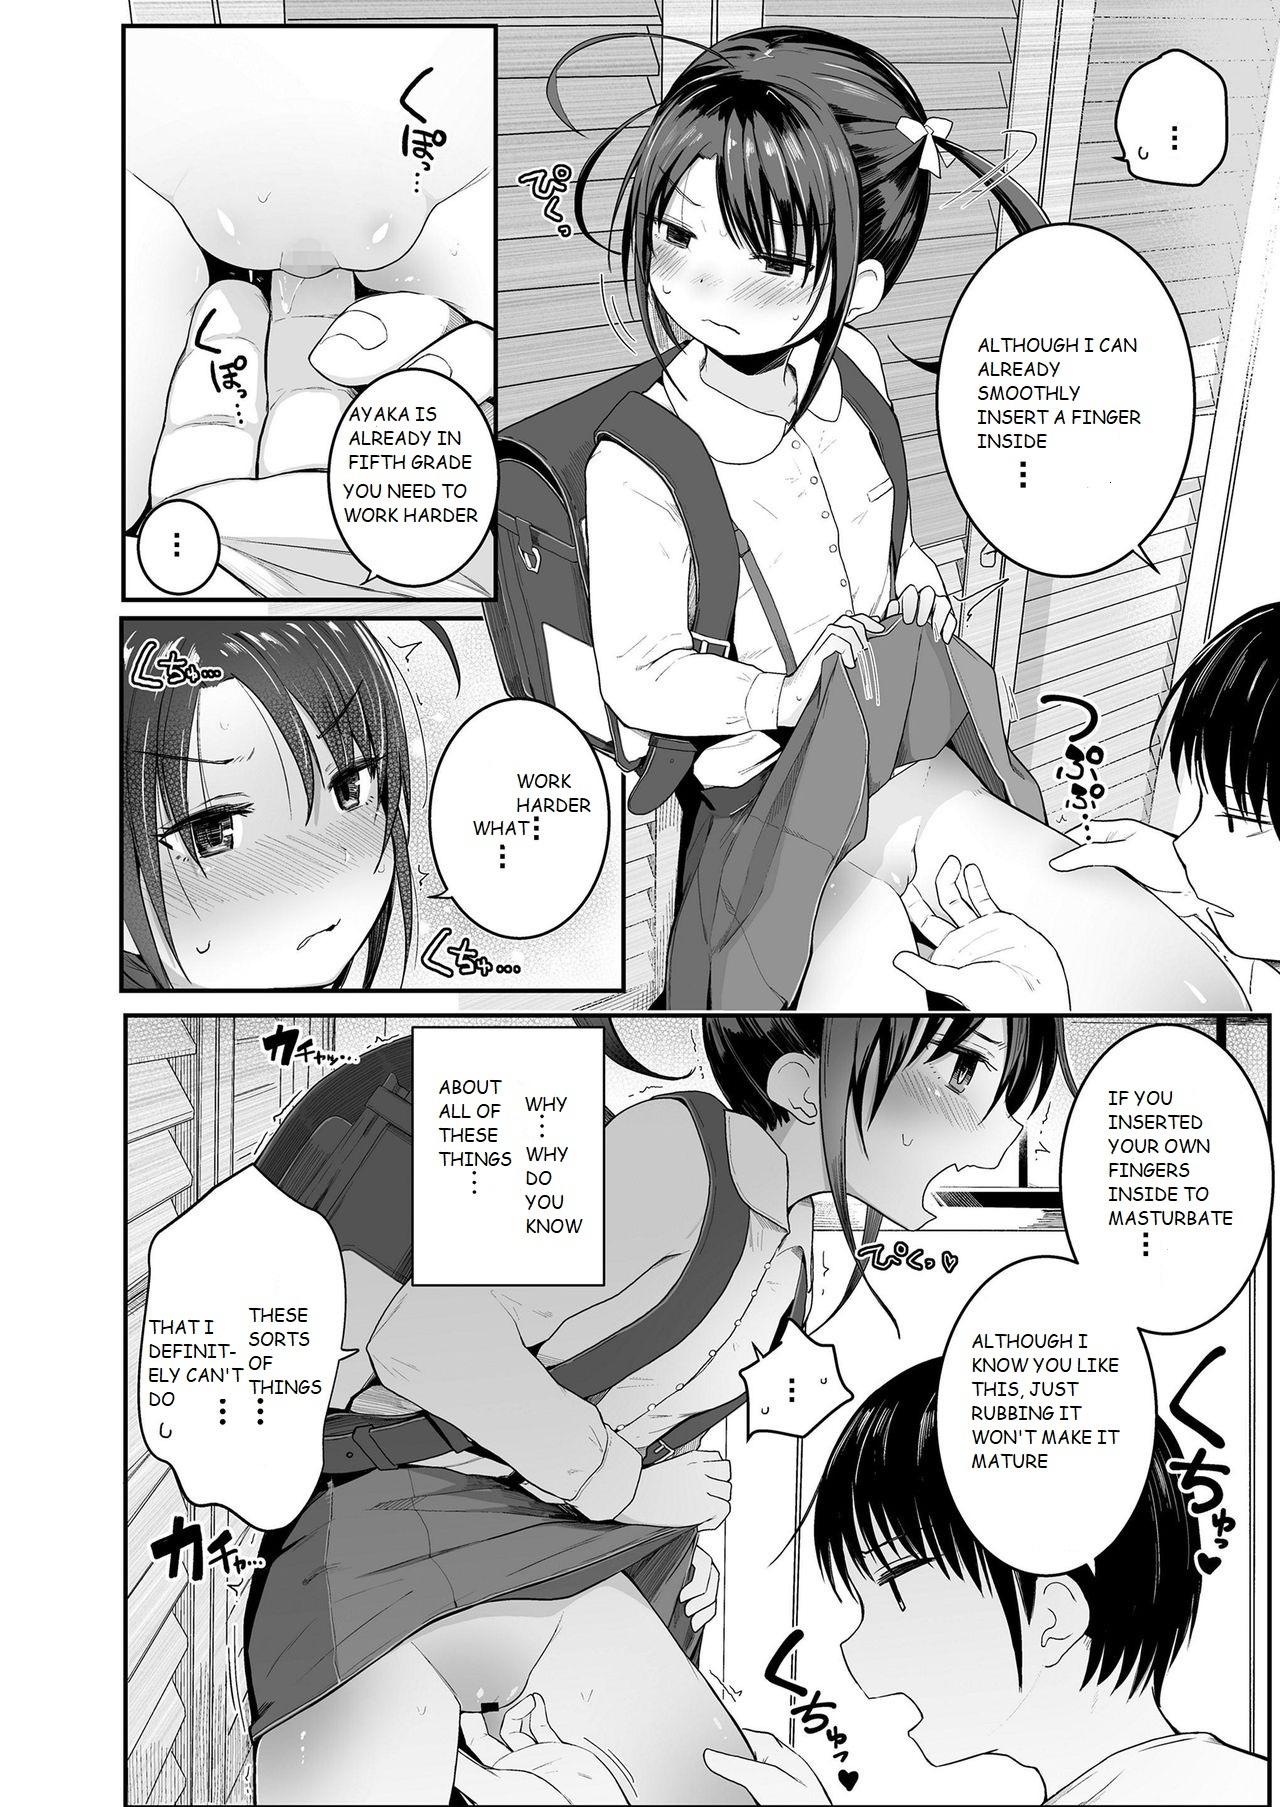 Camgirls Imouto no Himitsu... | My Little Sister's Secret... Straight - Page 4